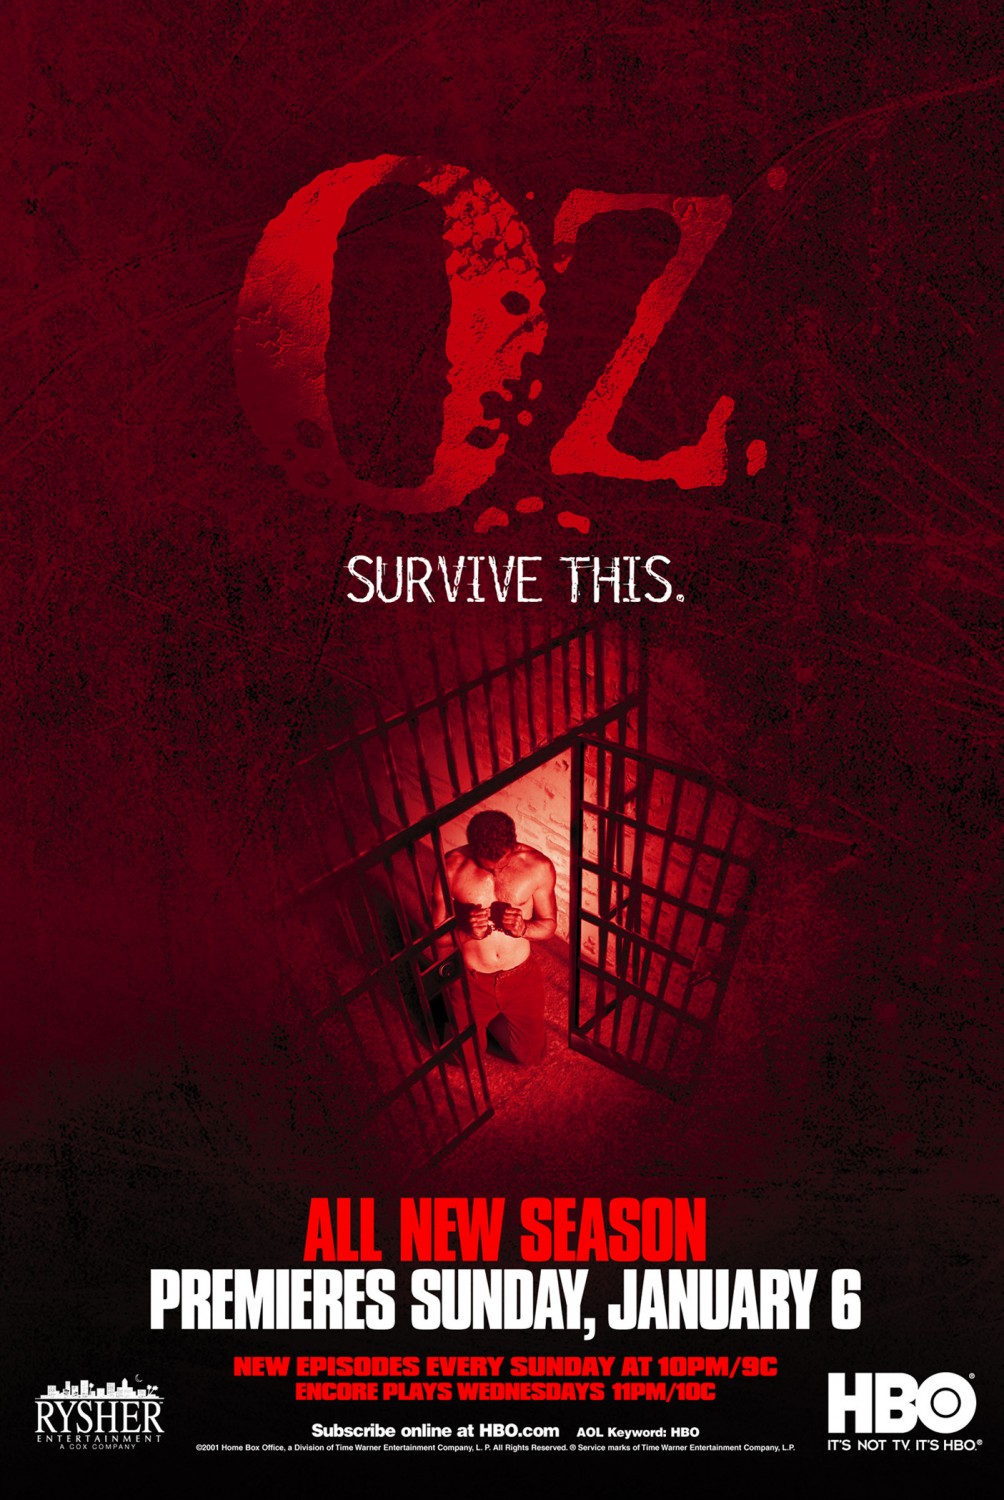 Extra Large TV Poster Image for Oz (#7 of 7)